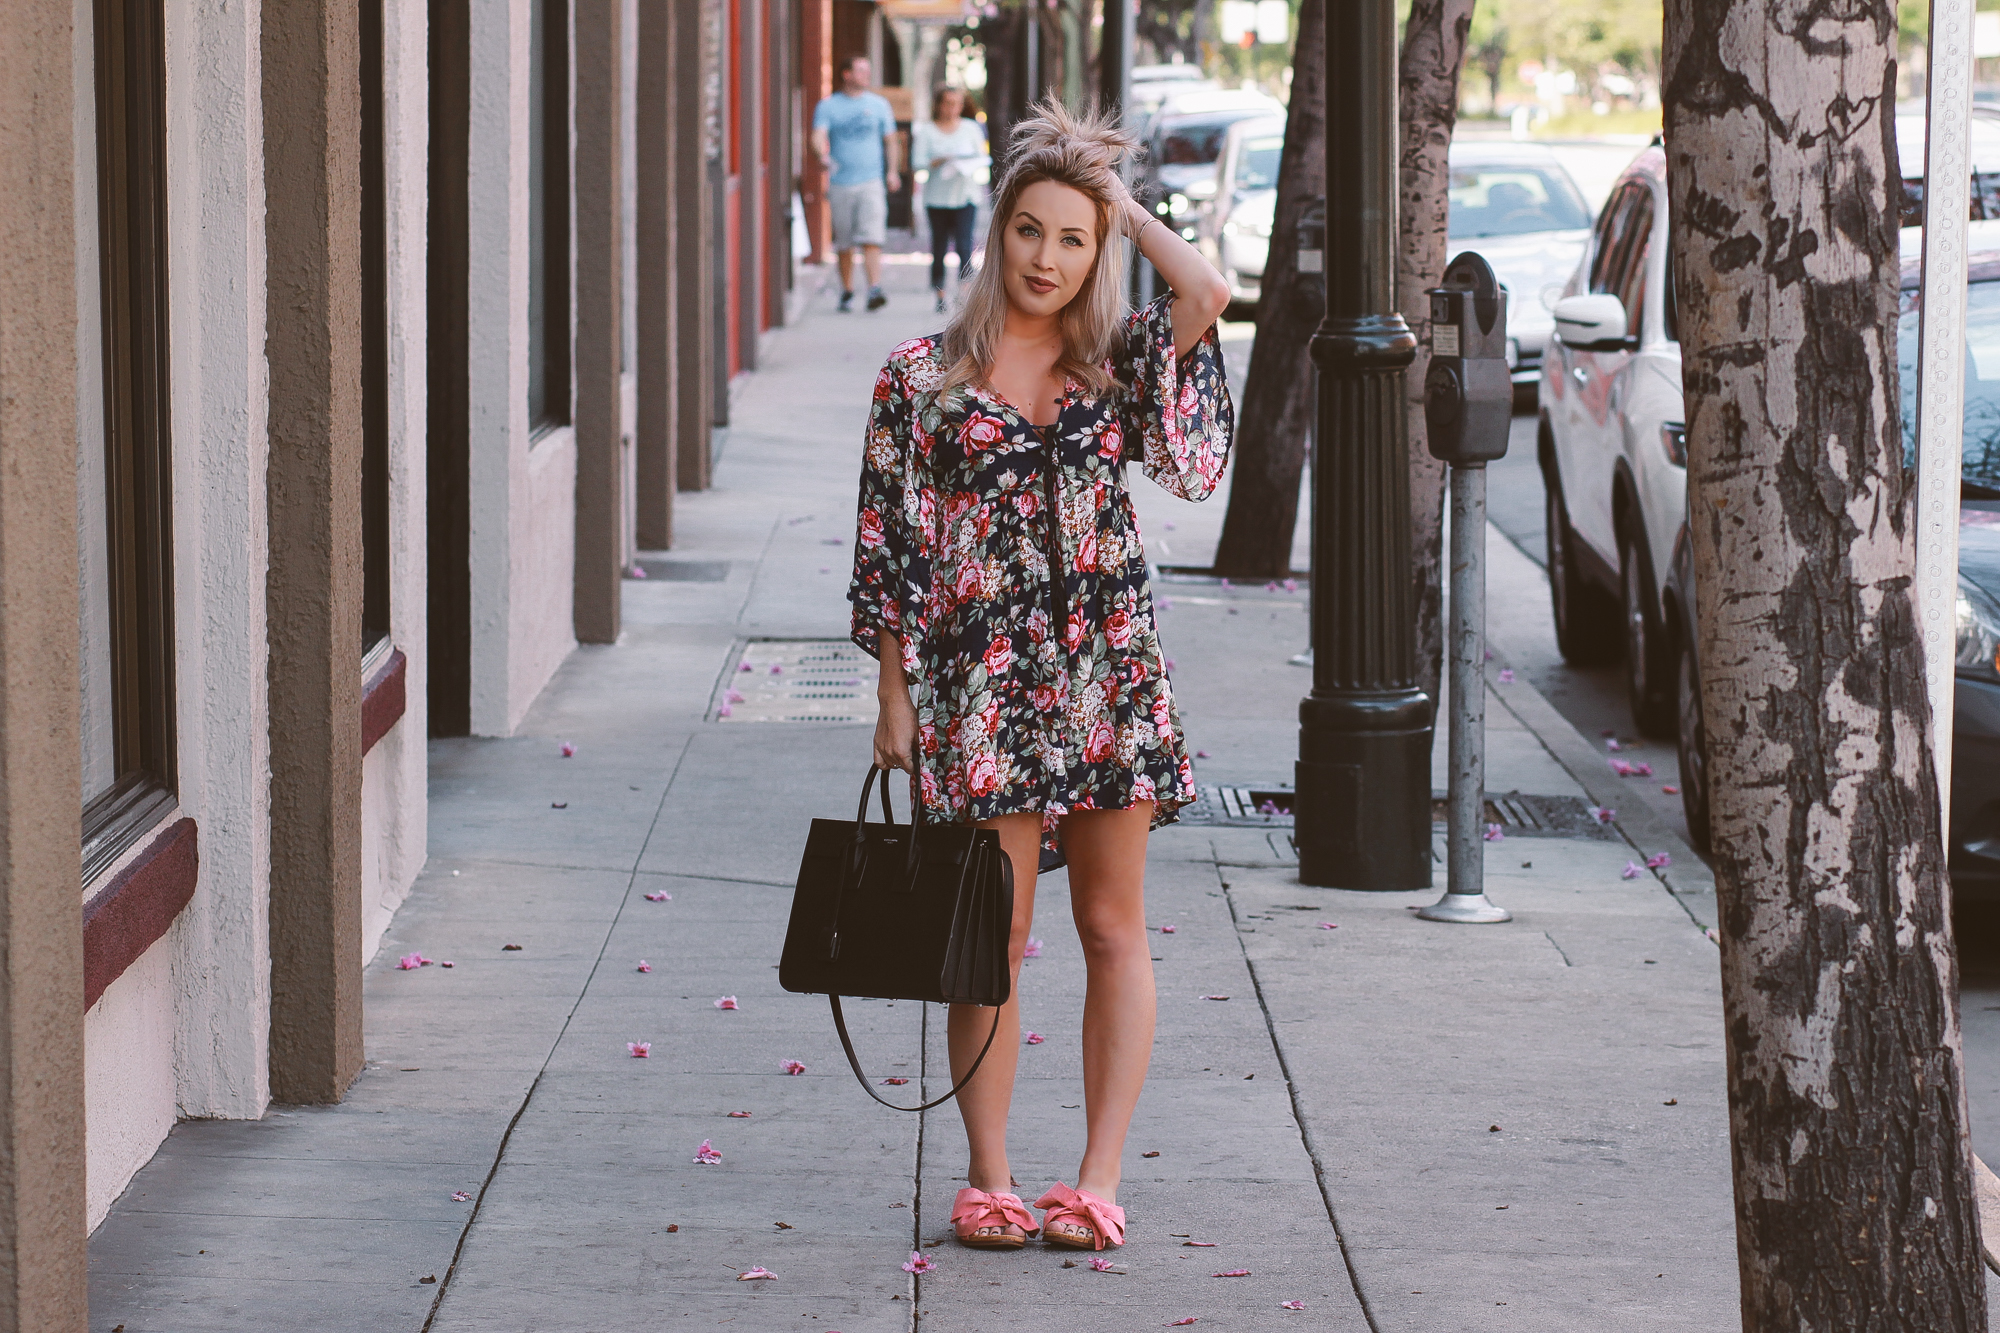 Blondie in the City | Floral Spring Dress | Sam Edelman Sandals |Pink Bow Shoes | YSL Bag